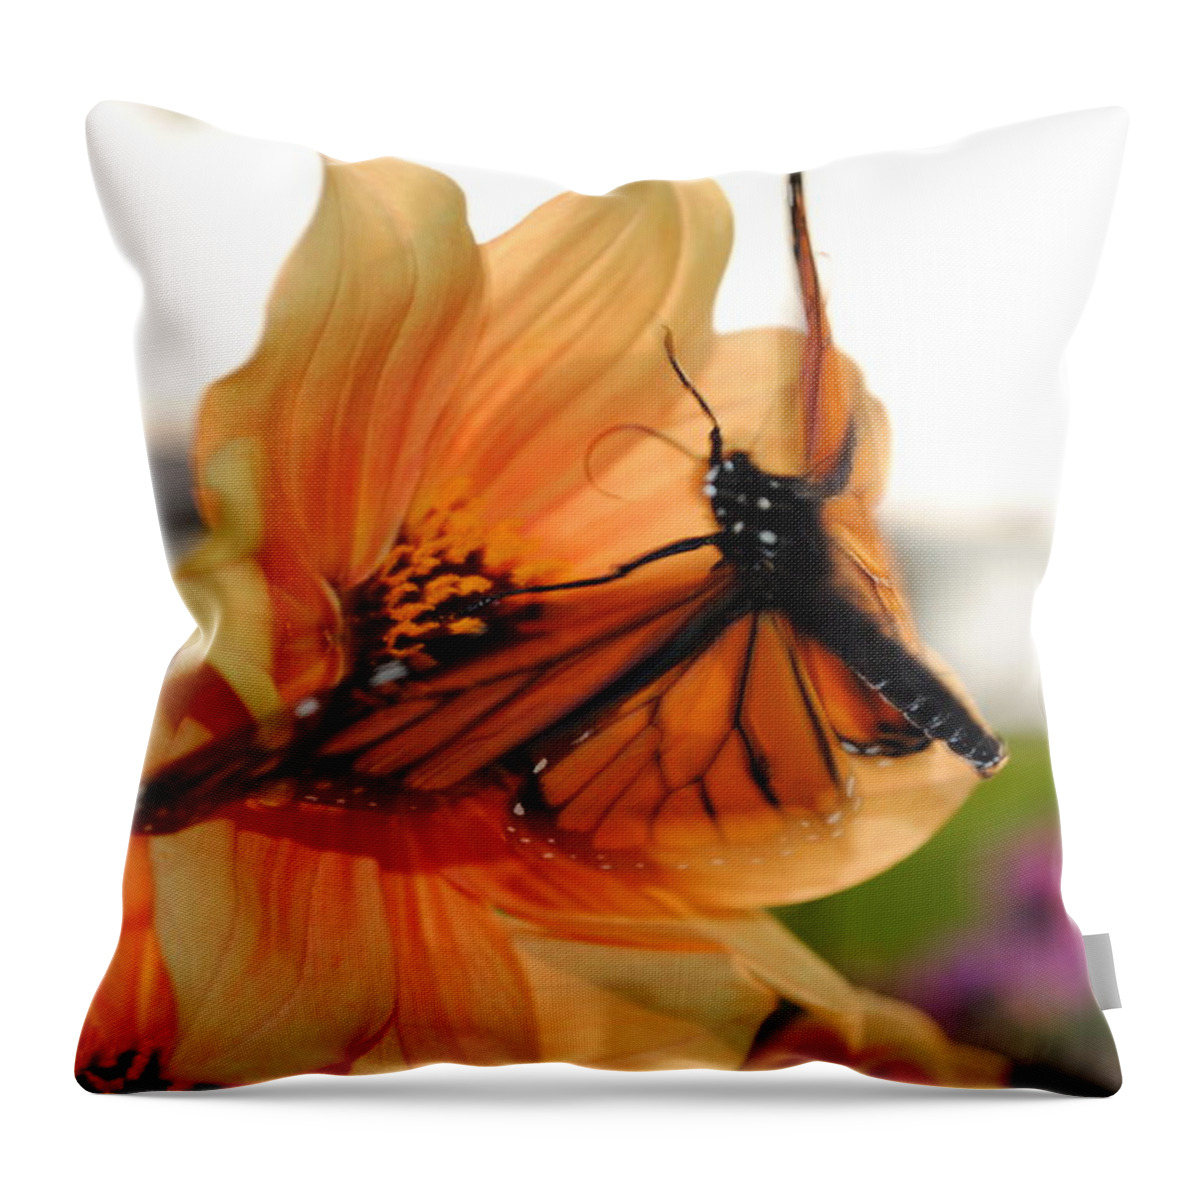  Throw Pillow featuring the photograph In Flight... by Michael Frank Jr